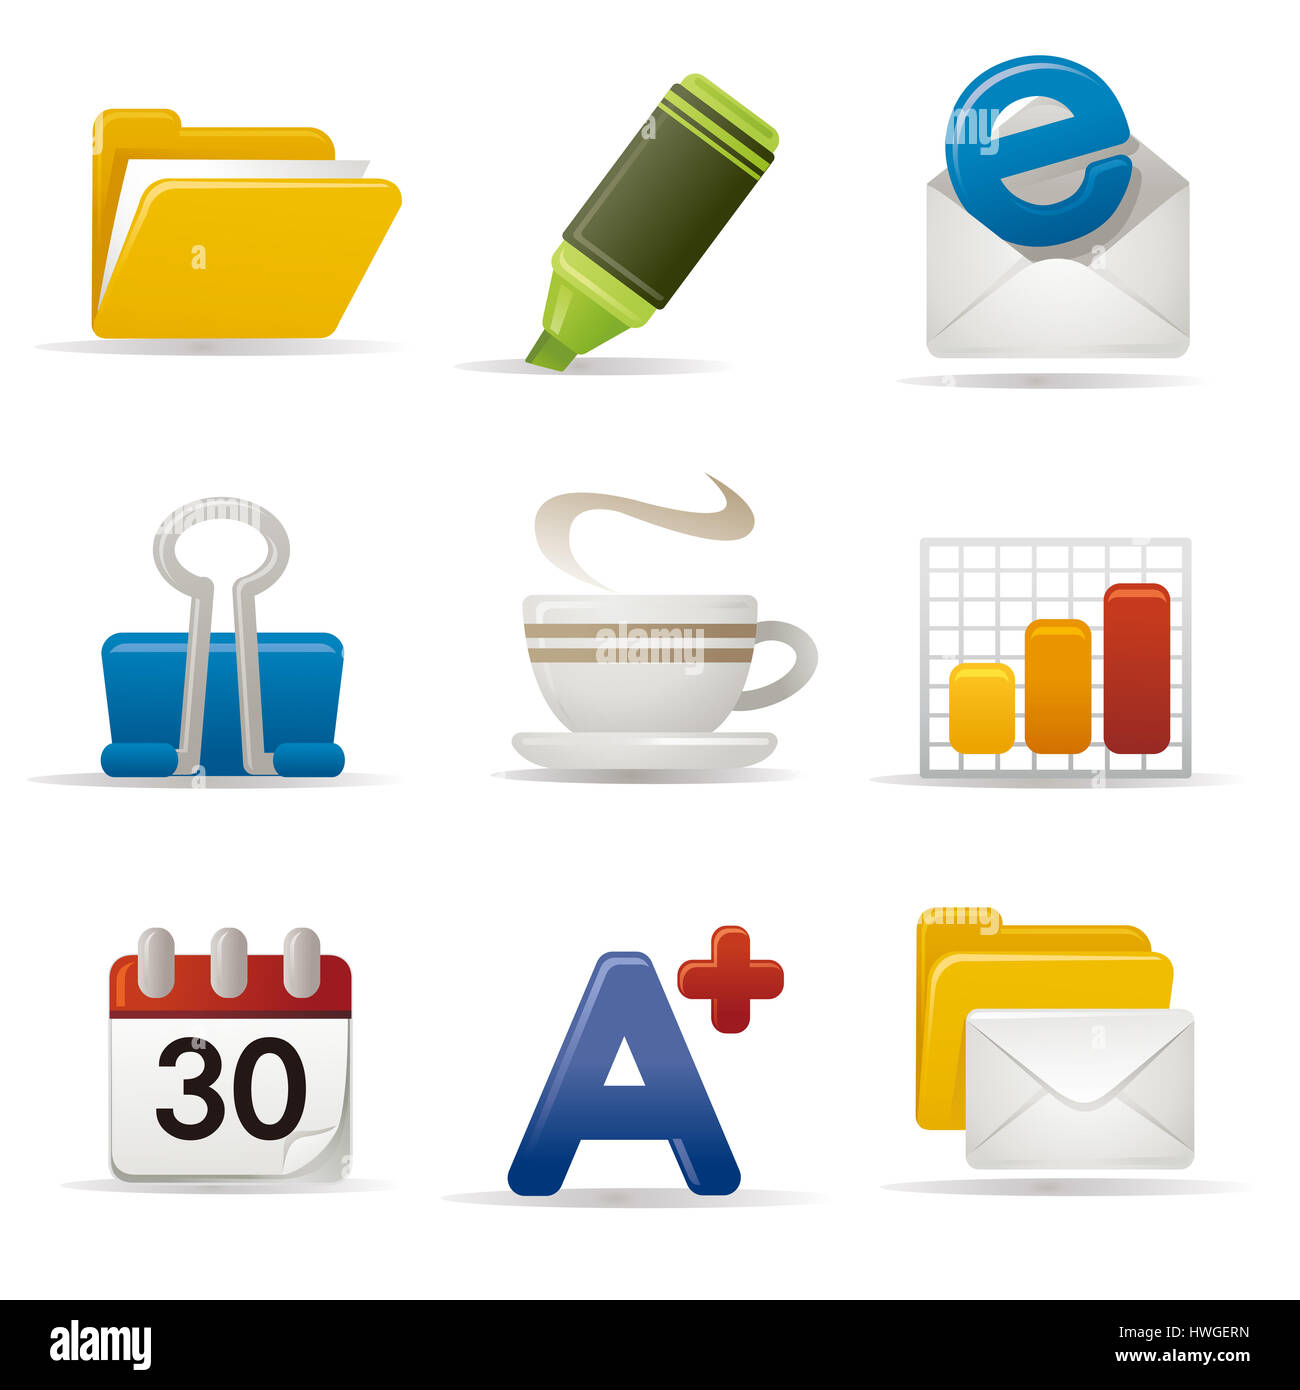 computer icon,folder,store,marker,pin,cup,hot,steam,cup of coffee,graph,variation,chart,calendar,month,month ending,a positive,alphabet,positive sign,mail,received,envelope,explorer,internet explorer,internet,mail,email,net,browser,network,e symbol,communication,technology,connection,white background,symbol,abstract,art,artwork,computer Stock Photo